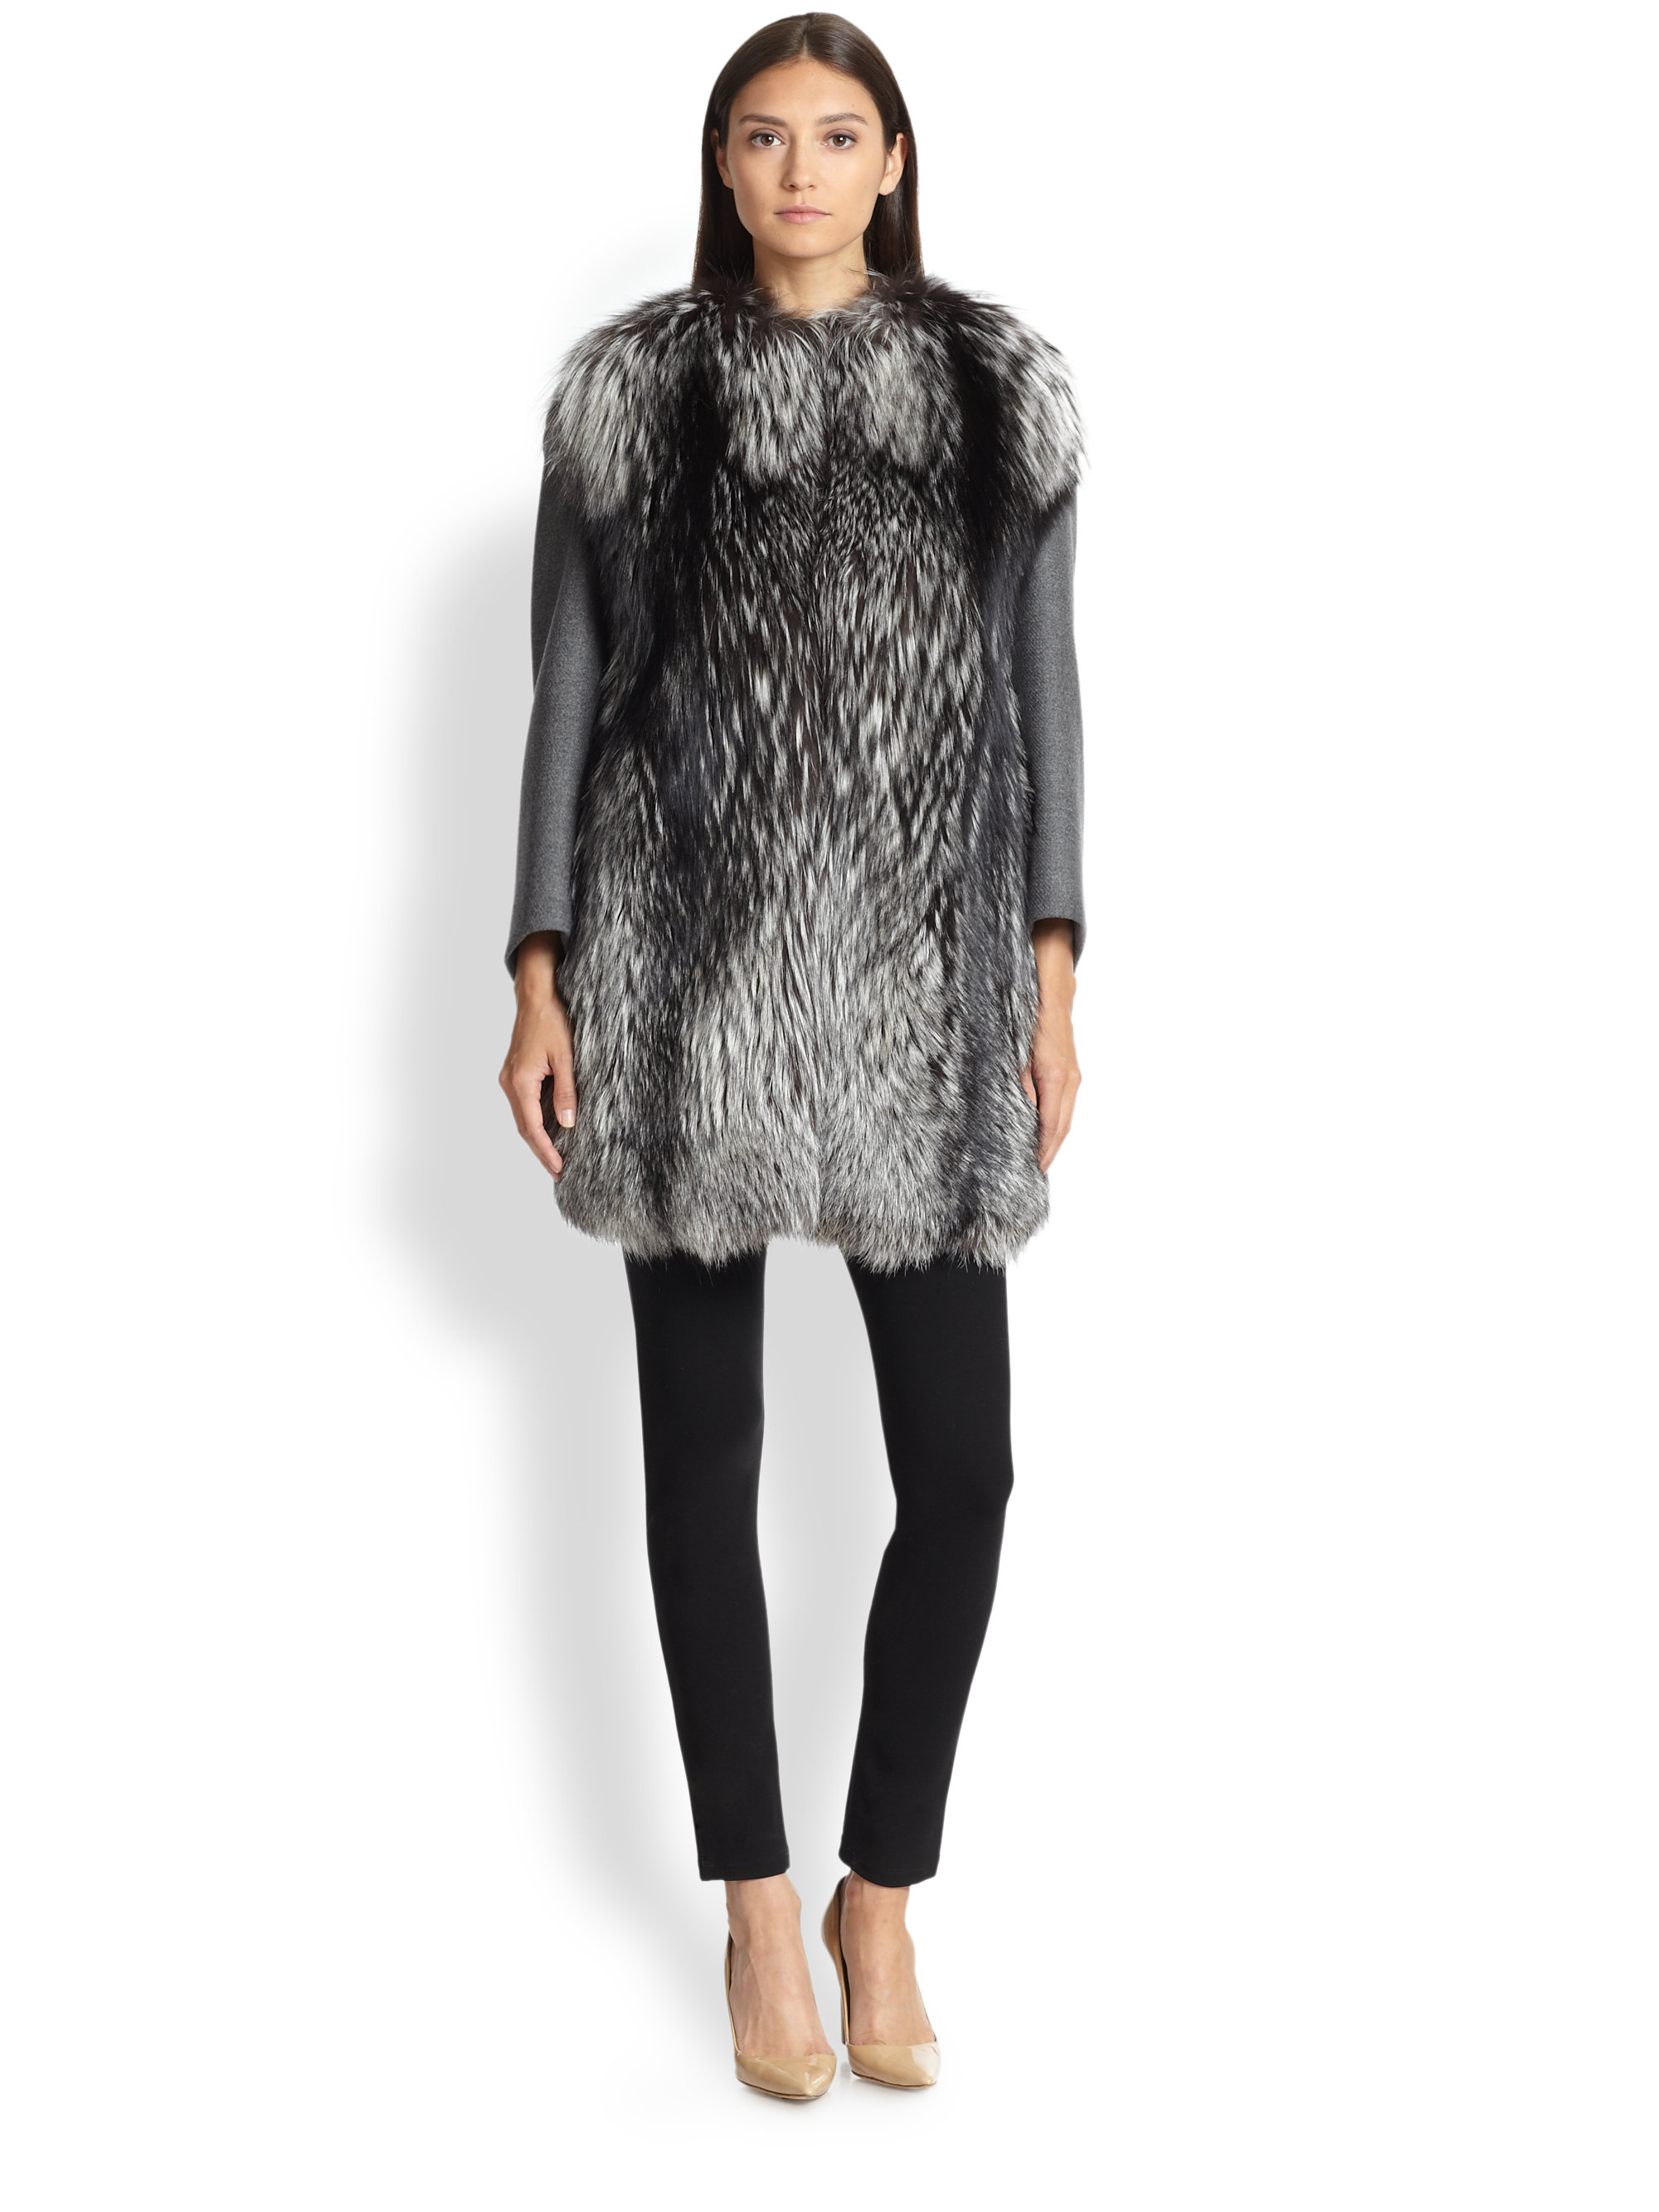 Lyst - Max Mara Fur-Front Wool & Cashmere Coat in Gray